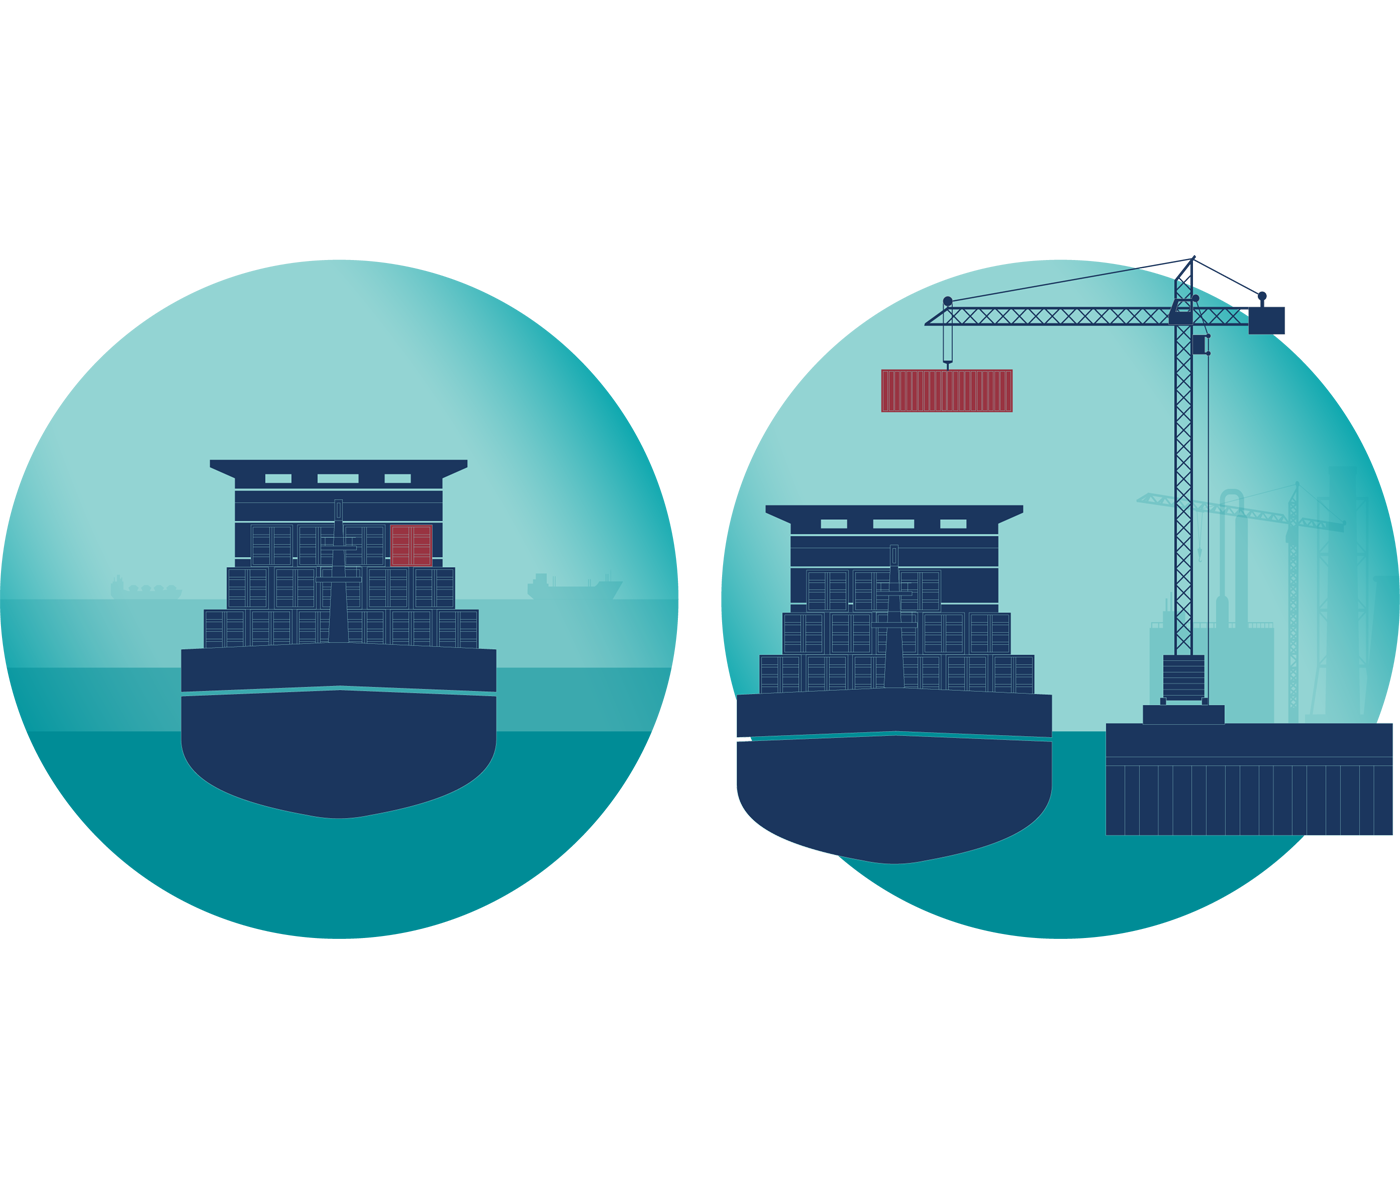 Containers illustration